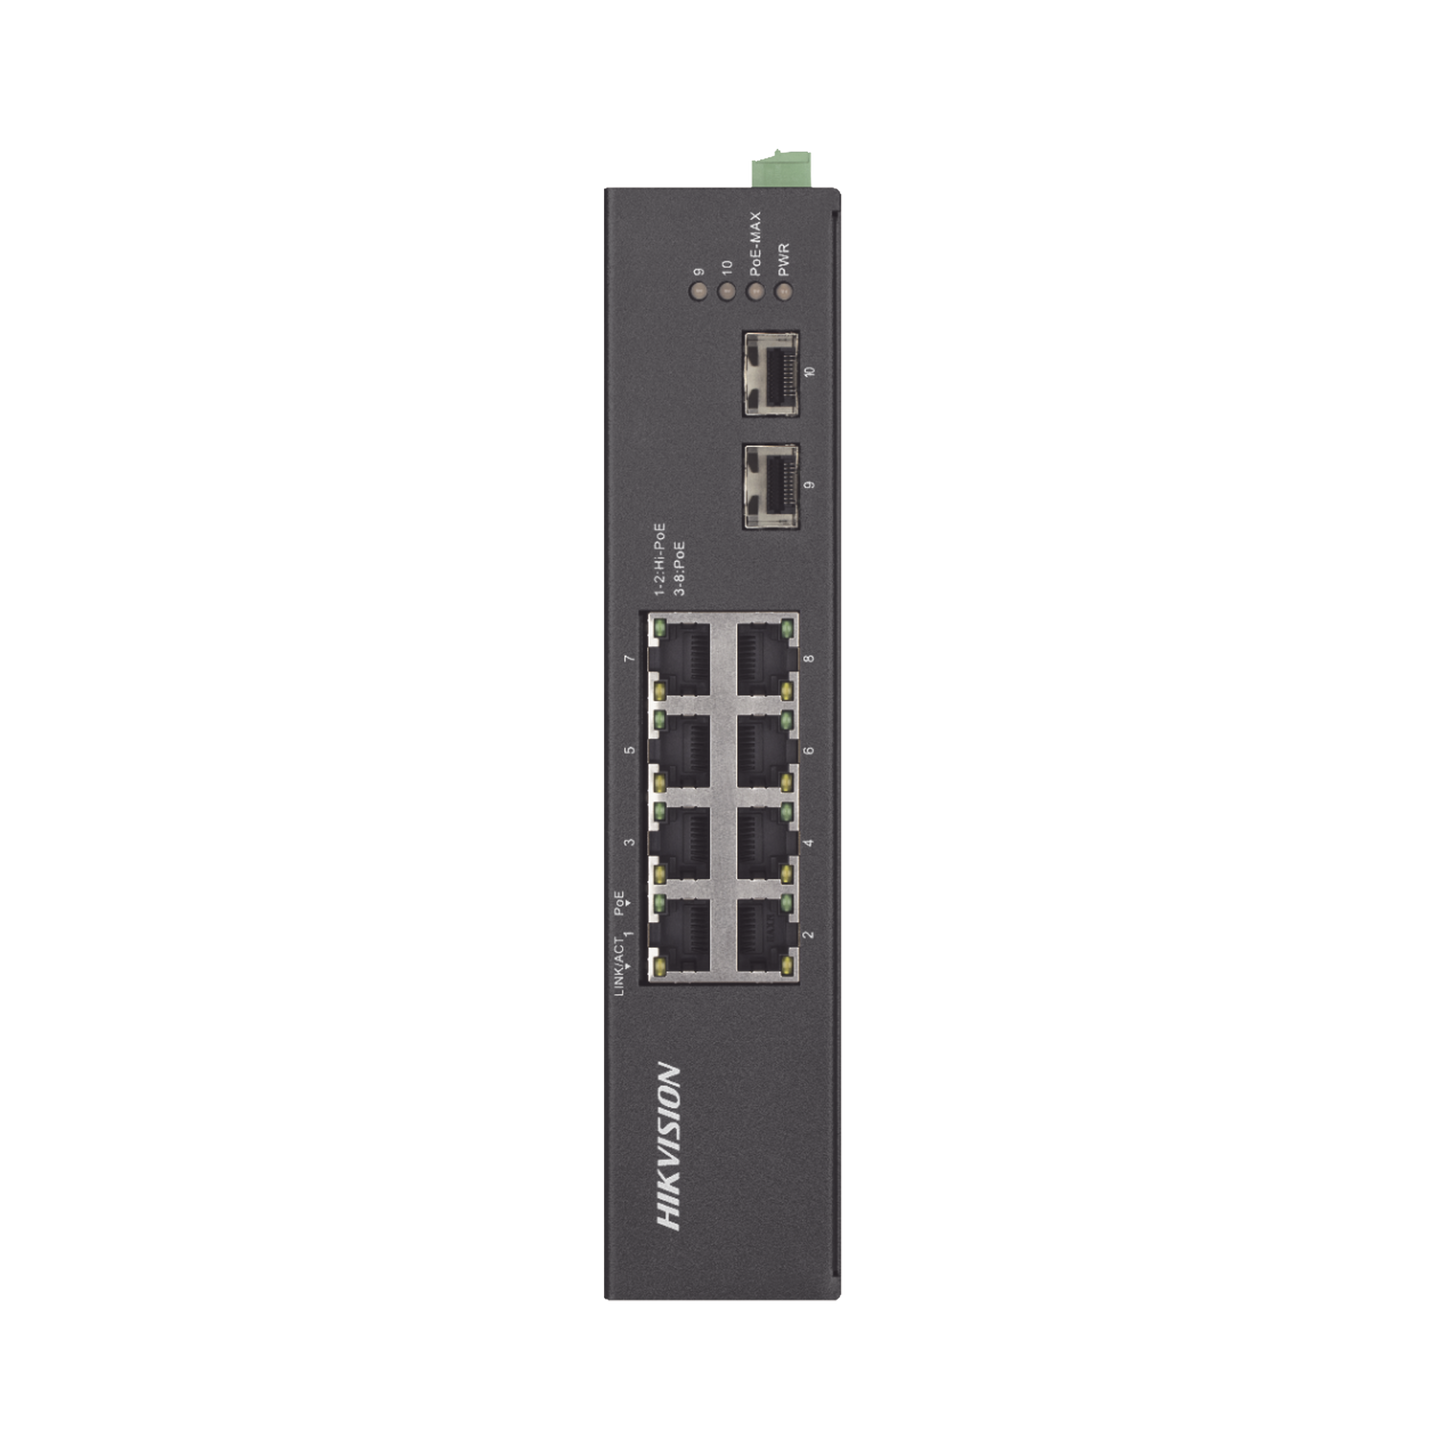 Switch Industrial No Administrable Gigabit / 6 Puertos Gigabit PoE+ (30 W) + 2 Puertos Gigabit PoE++ (60 W) / 2 Puertos SFP / 120 W Total / 48 a 57 VCD / Ideal para Proyectos